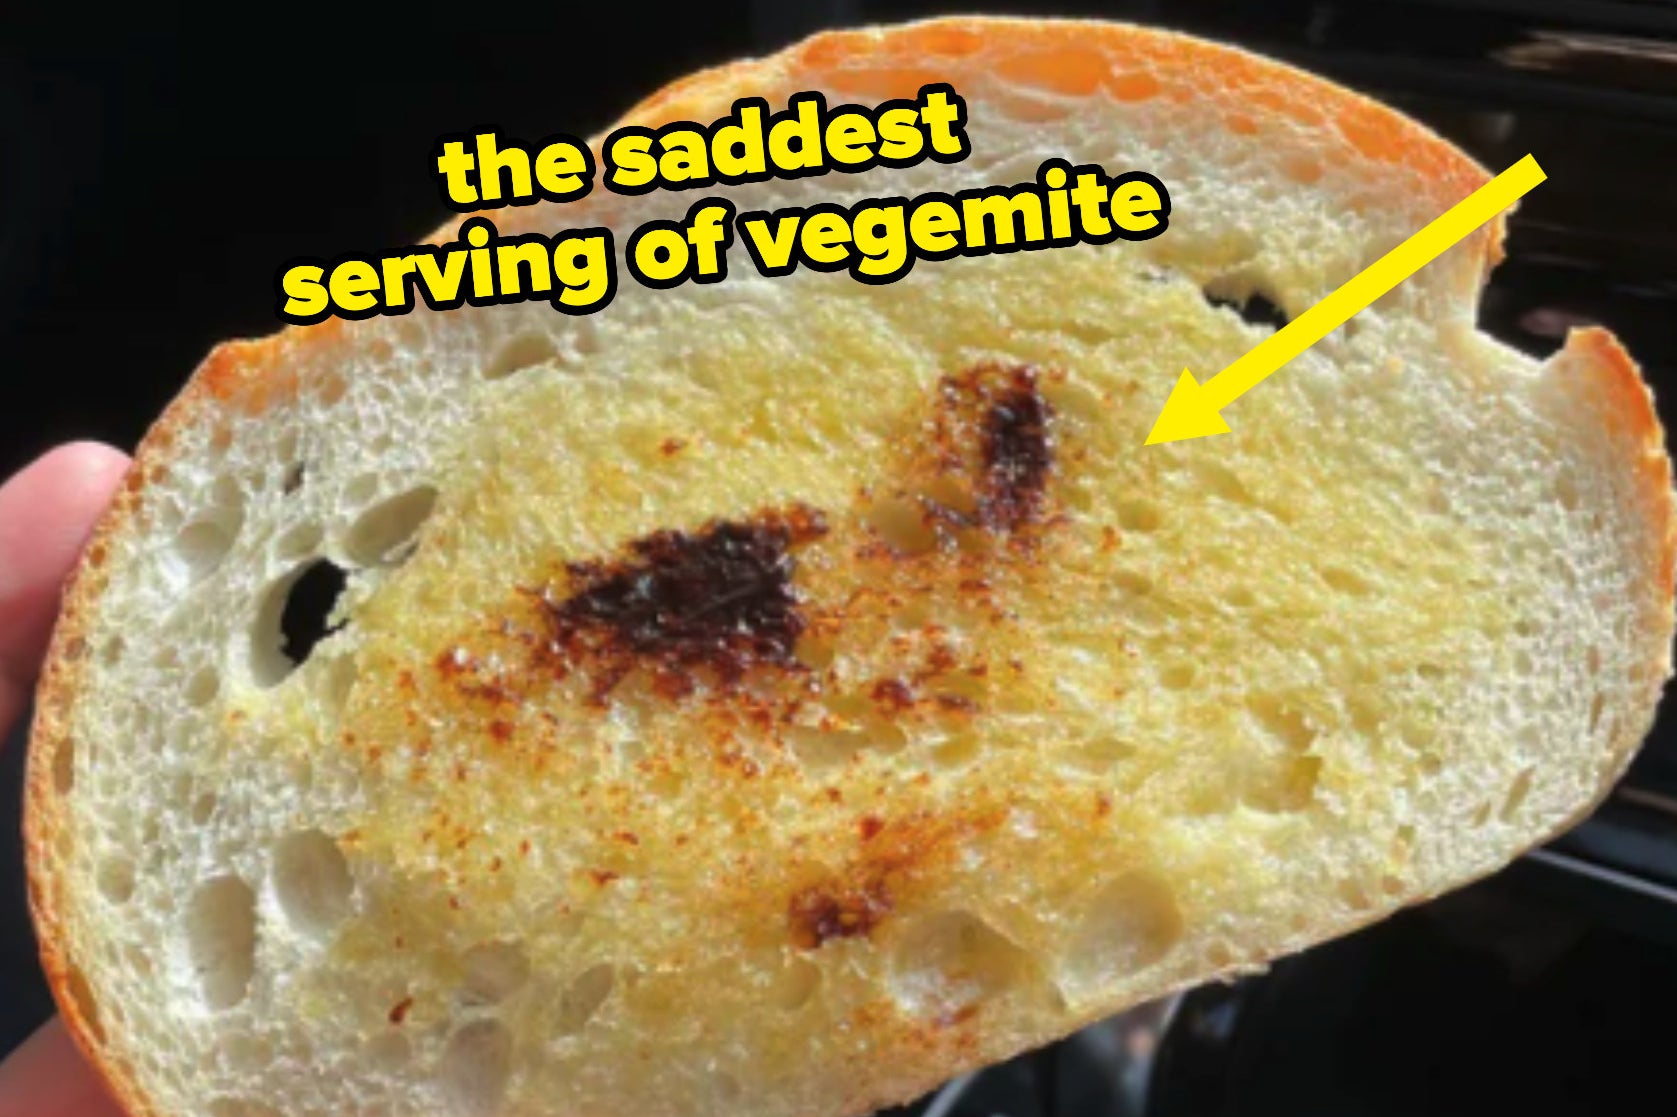 A close up of the Vegemite toast; there is an arrow highlighting the stingy application of Vegemite on the piece of toast